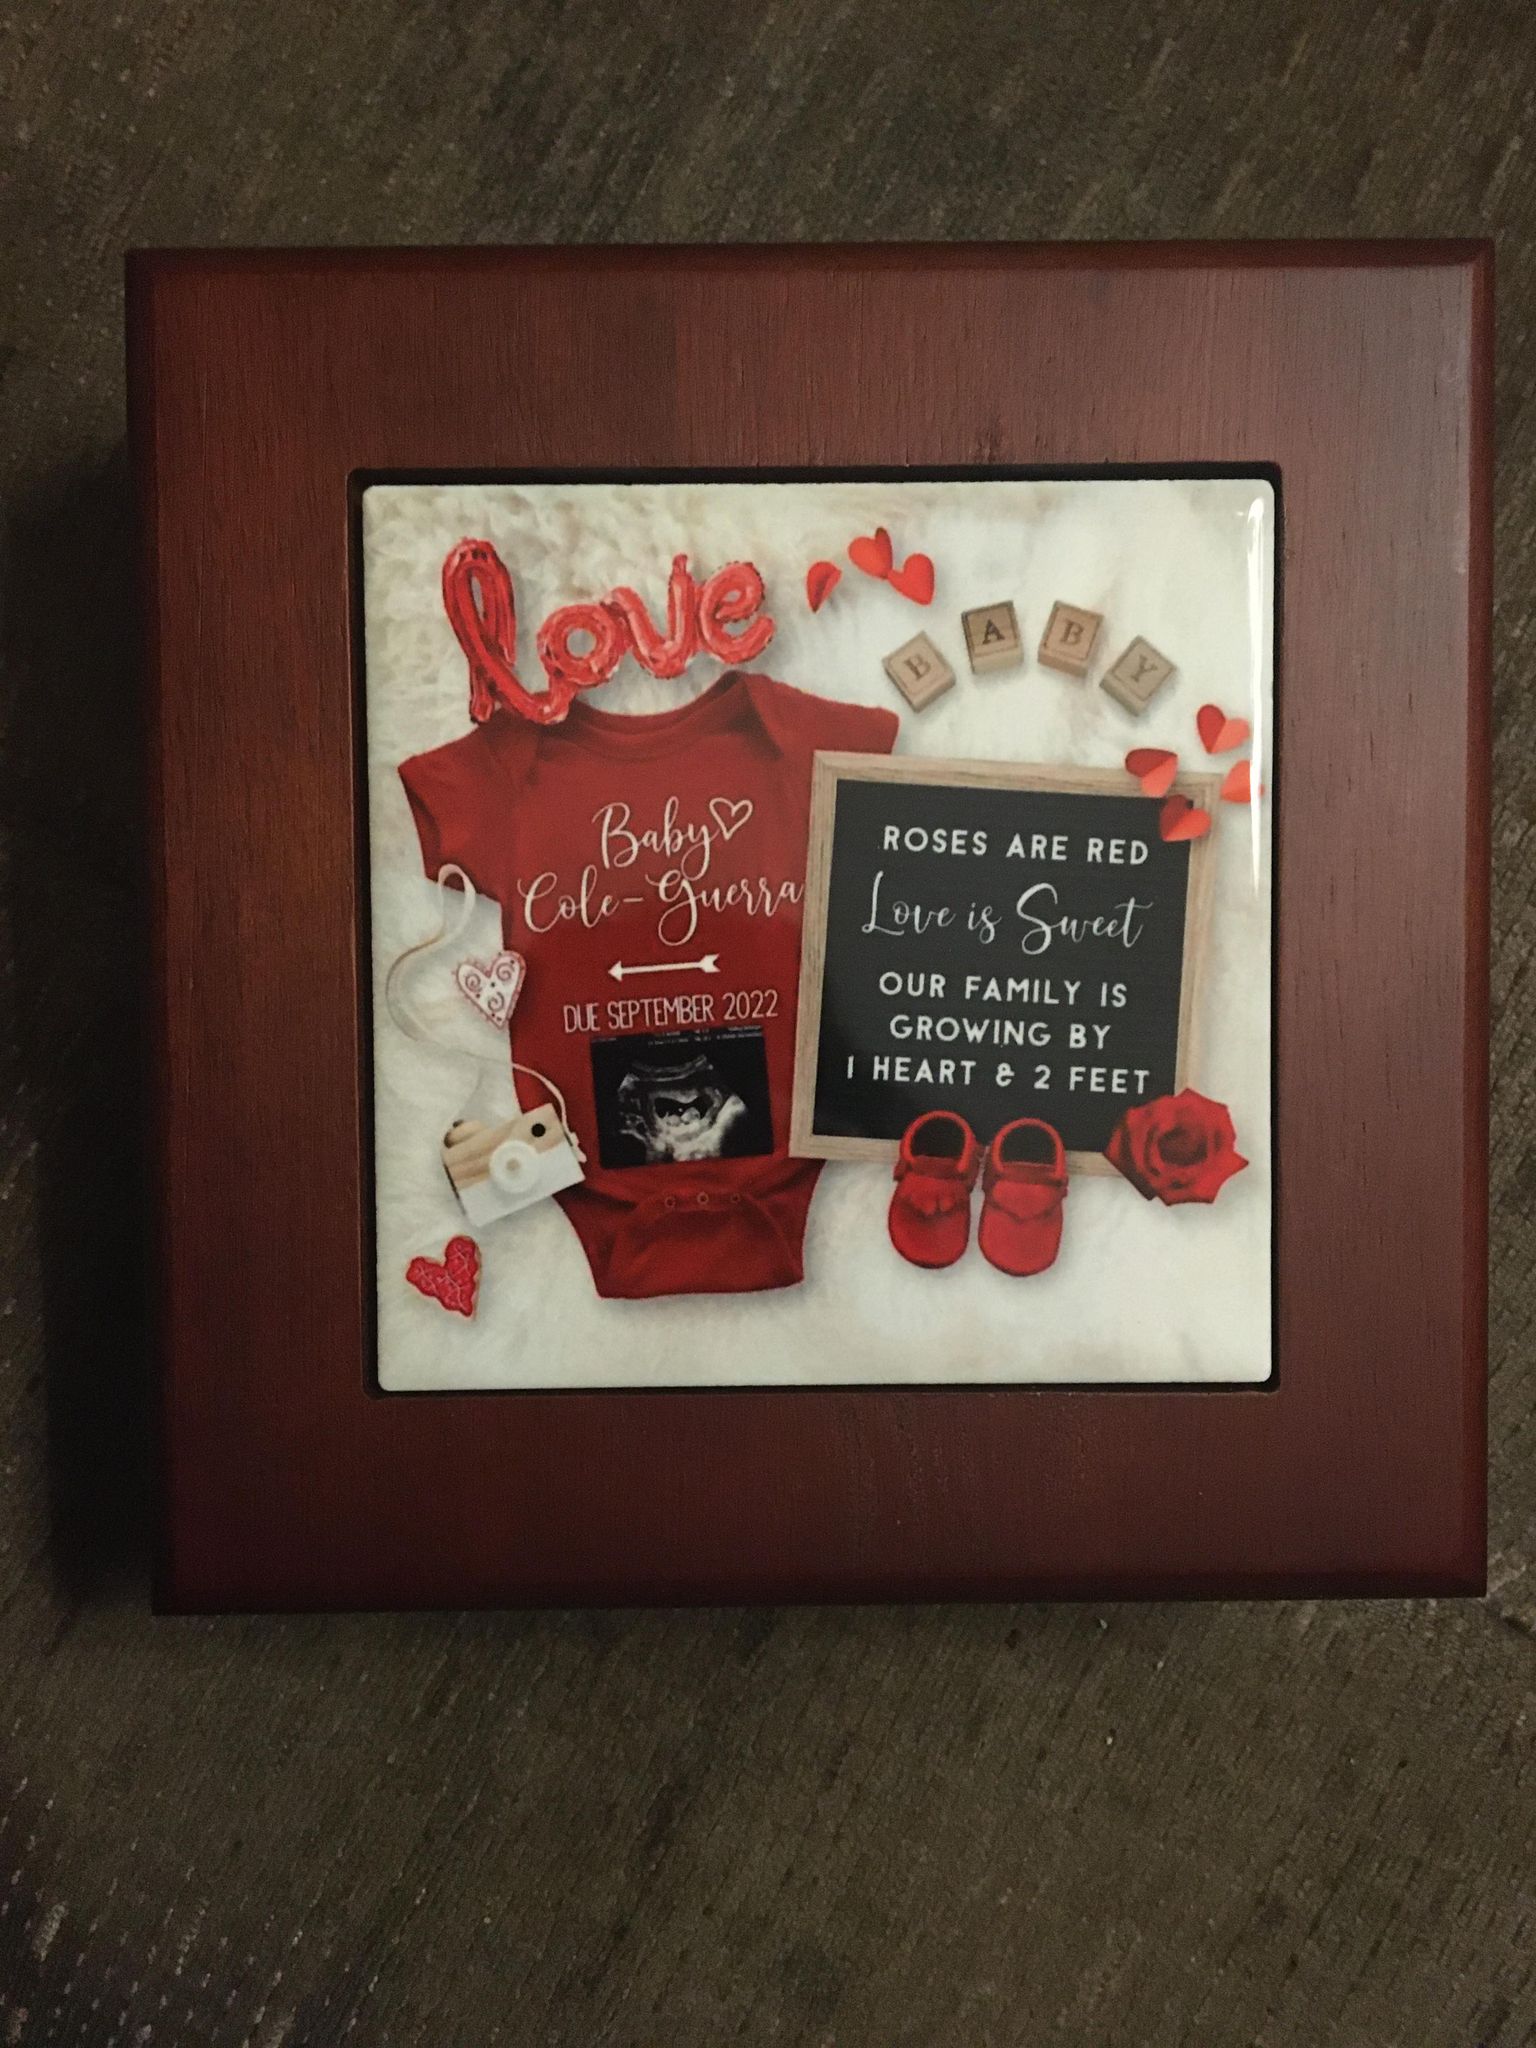 This was a special order using the wooden keepsake box with the Iron clad gloss tile.   The qua